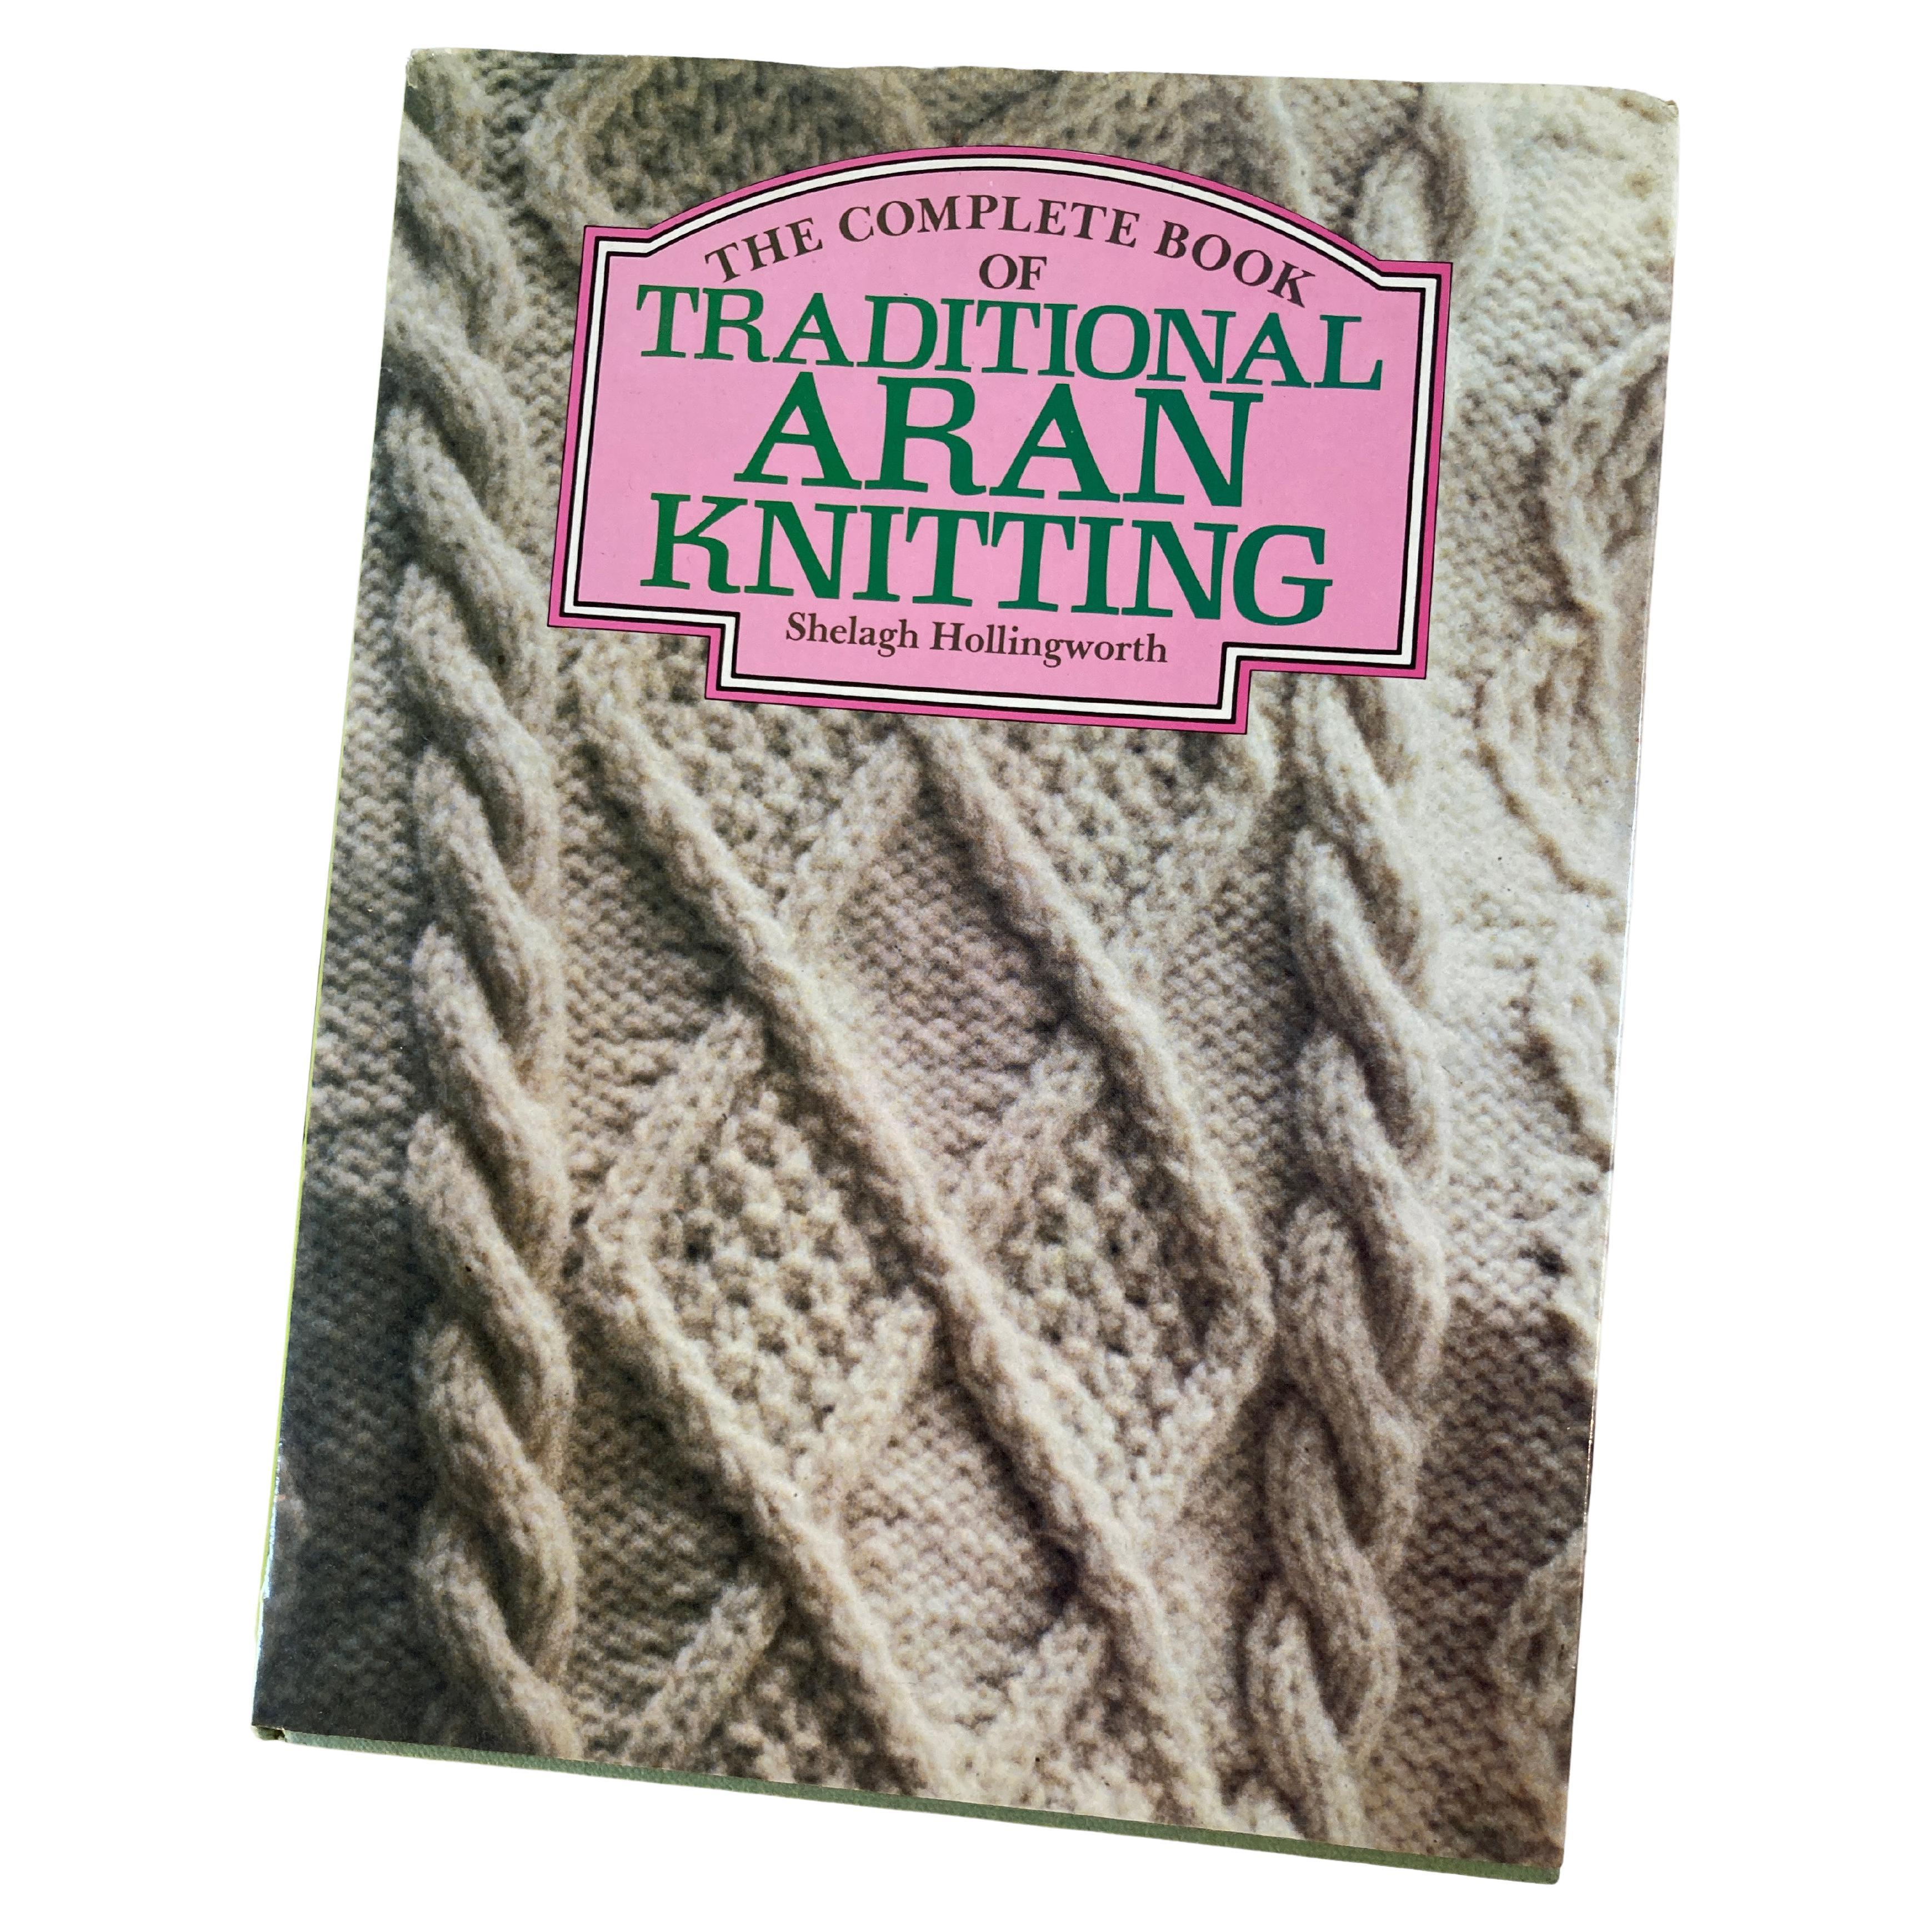 Complete Book of Traditional Aran Knitting by Shelagh Hollingworth 1982 For Sale